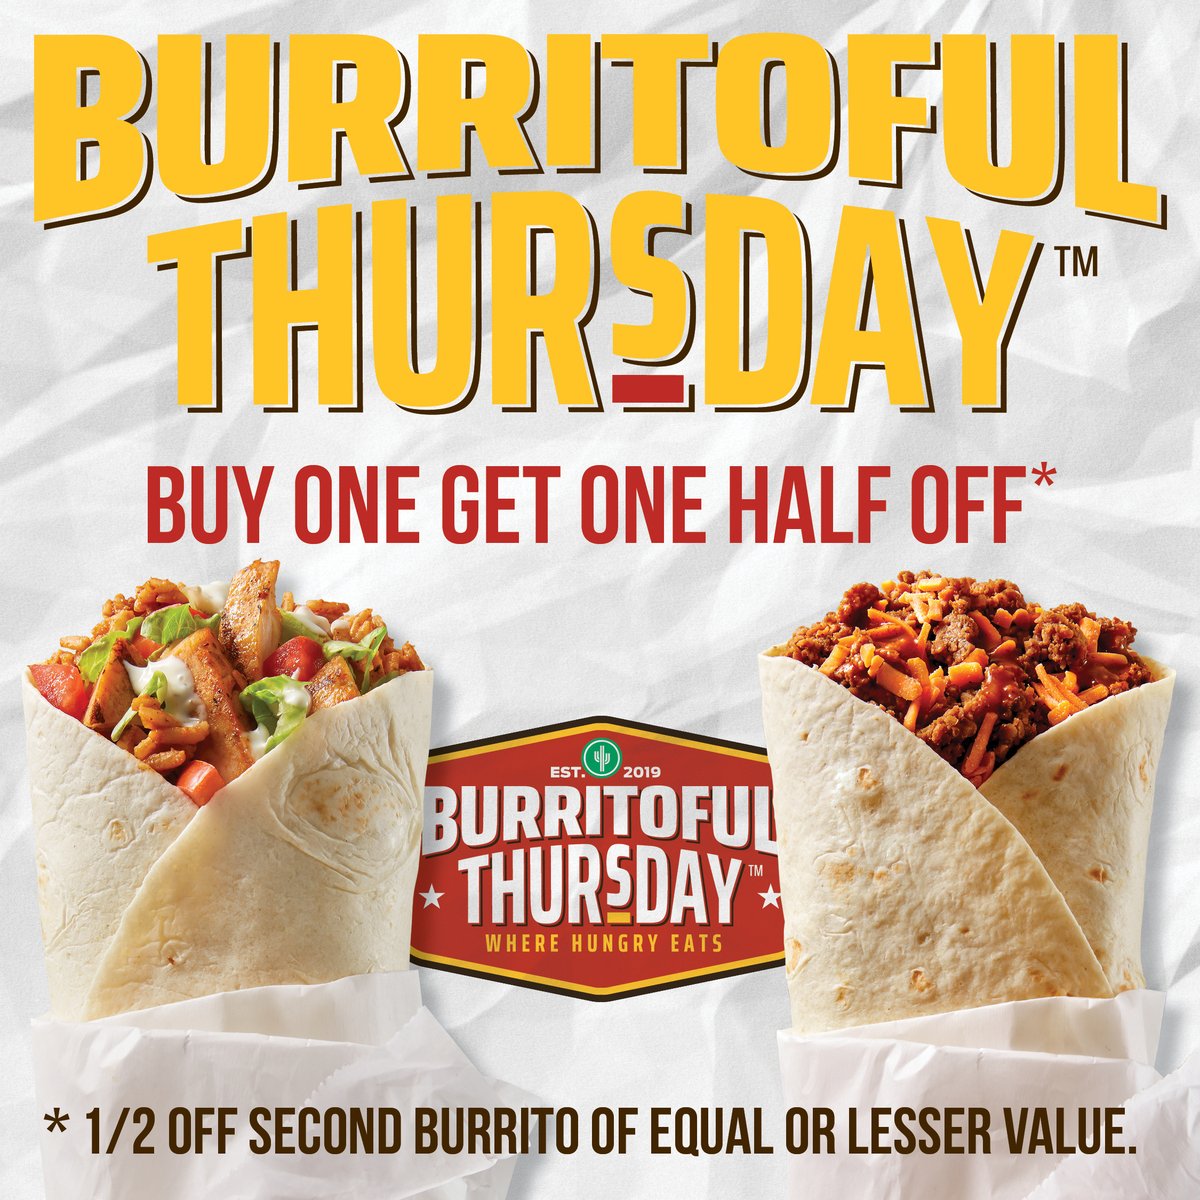 It’s Burritoful Thursday ! A great day to share burritos with loved ones or have some all to yourself ... ‘Where Hungry Eats!’ 🌵🌵🌵